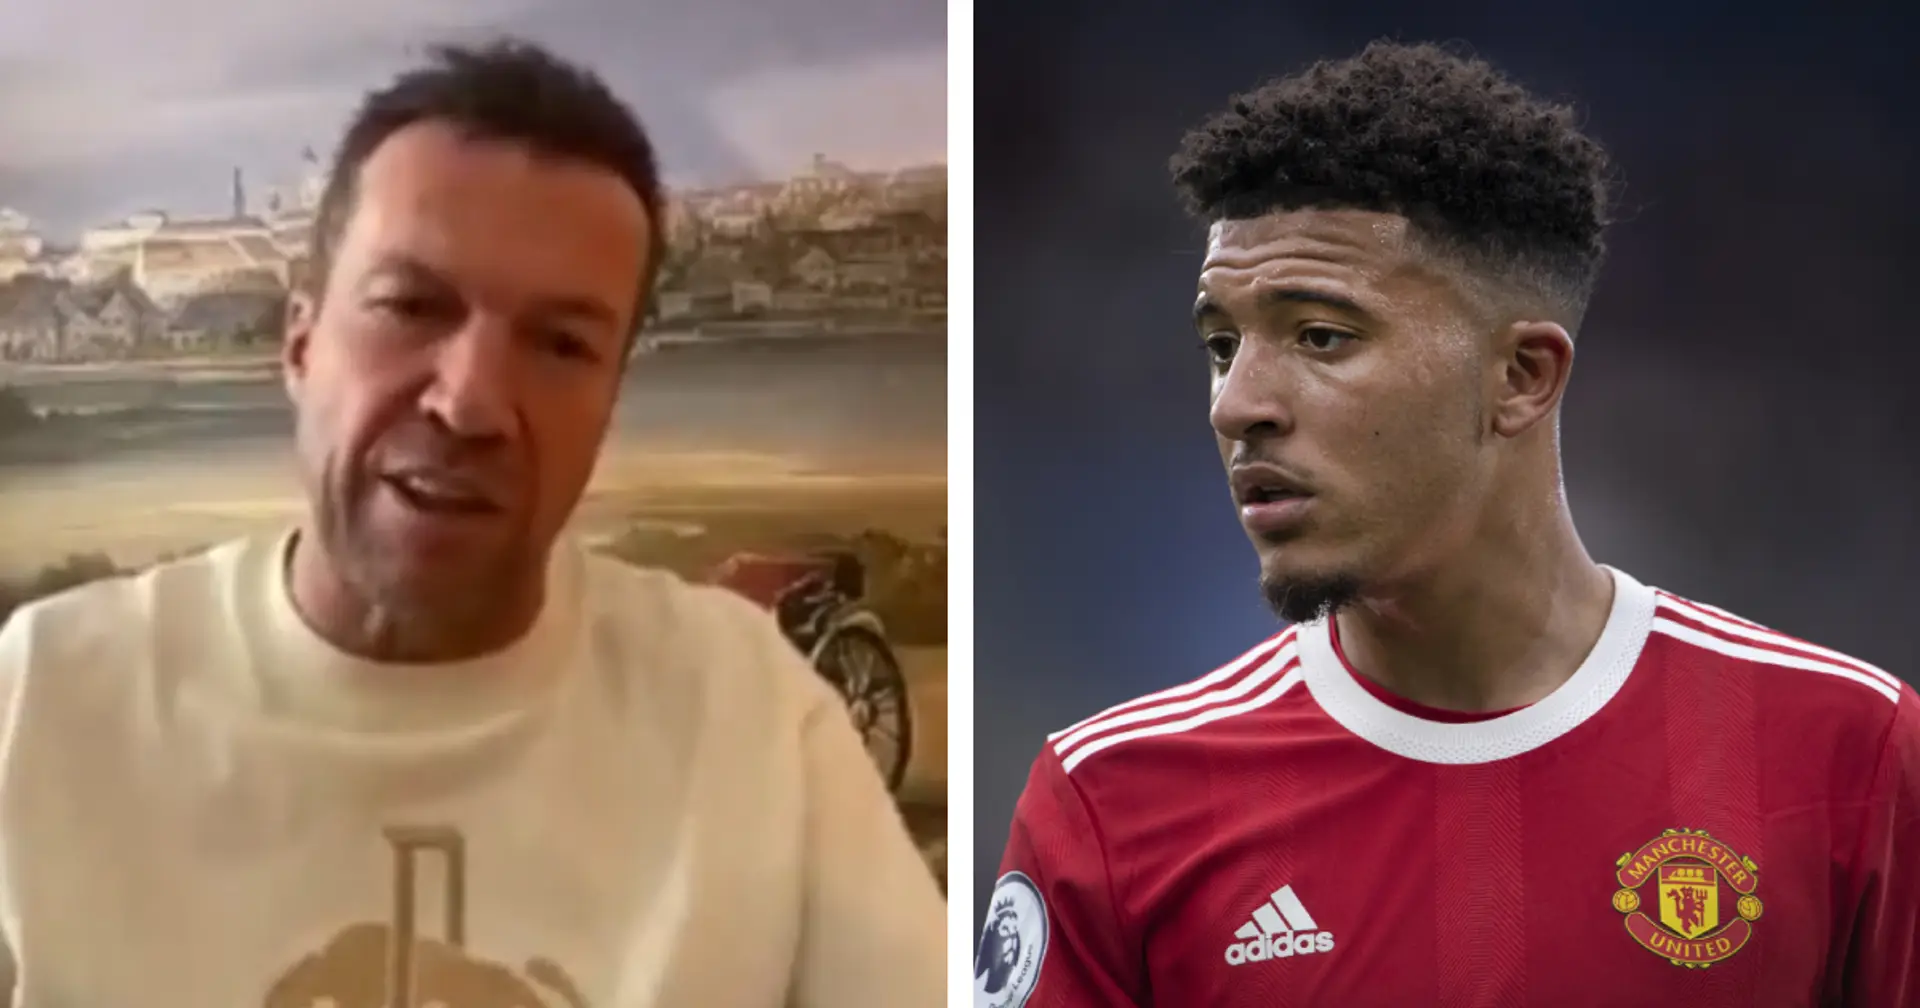 Jadon Sancho told Man United move was a 'mistake' by Germany legend Lothar Matthaus